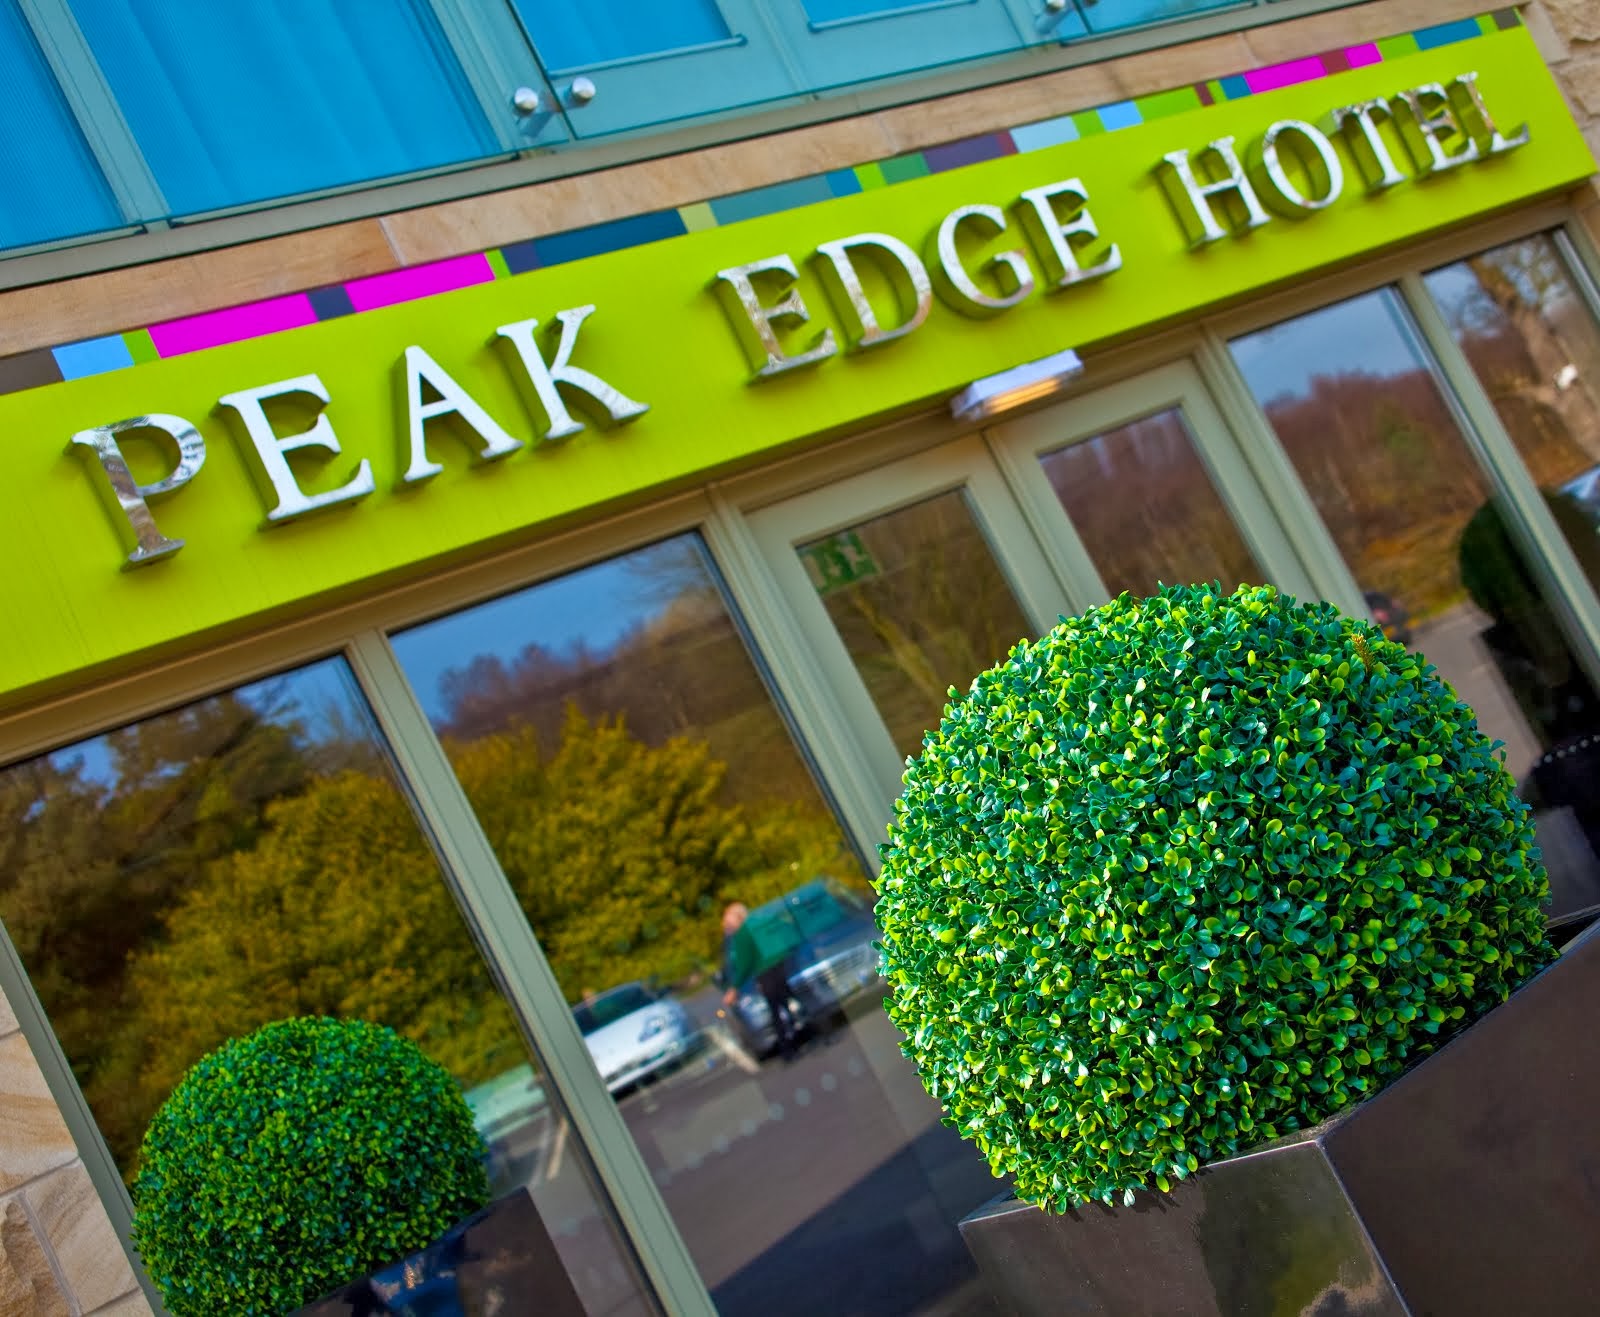 Back to the Peak Edge Hotel at The Red Lion website